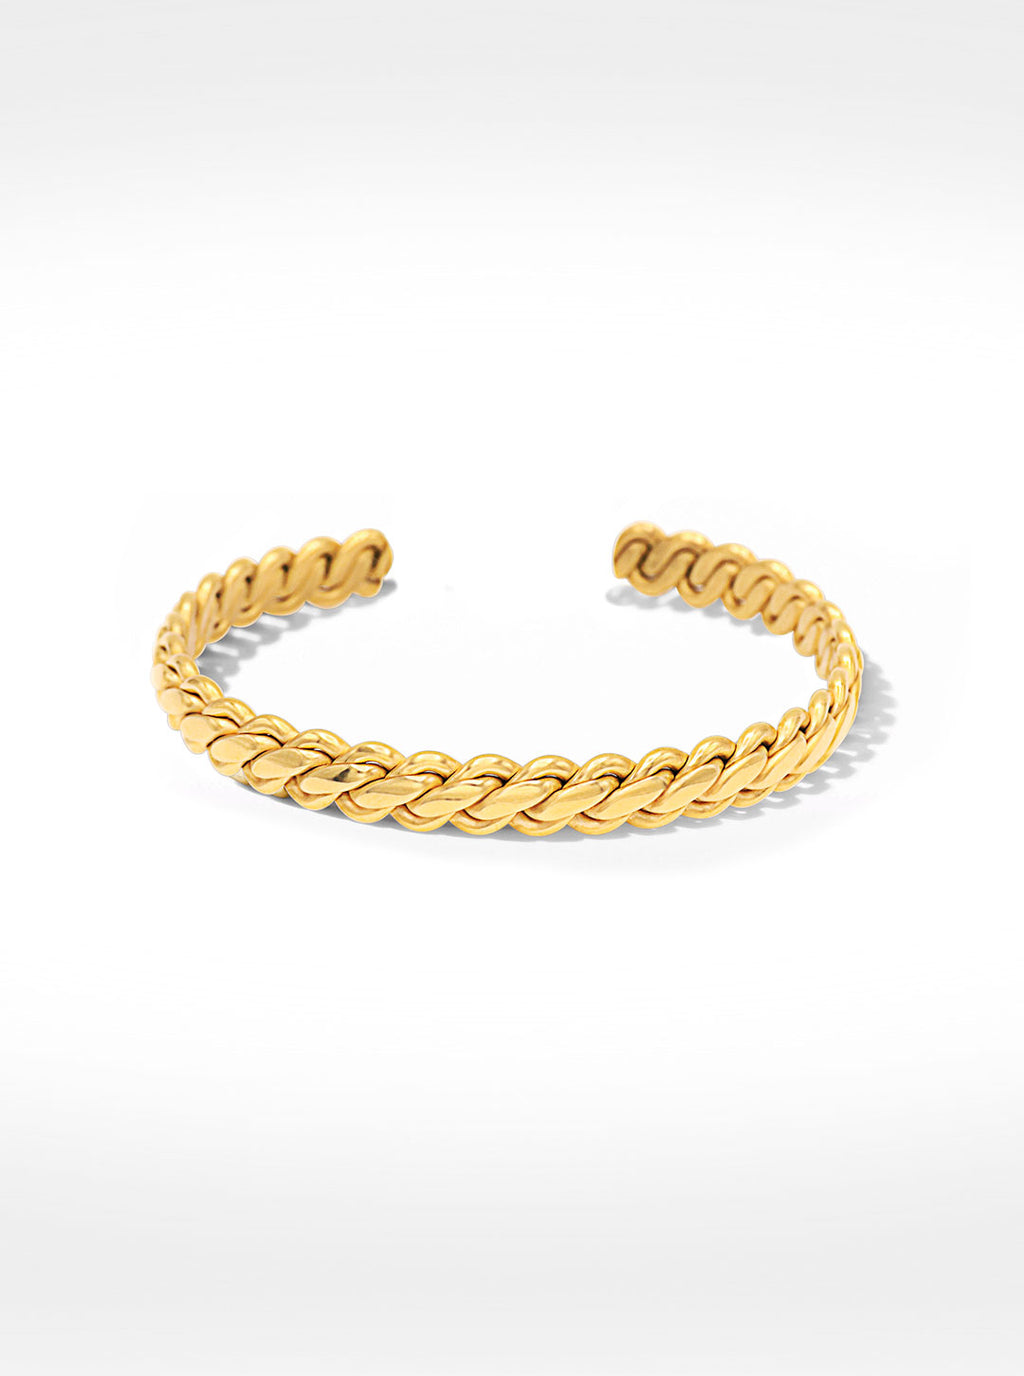 14 karat gold cuff bangle style made of stainless steel